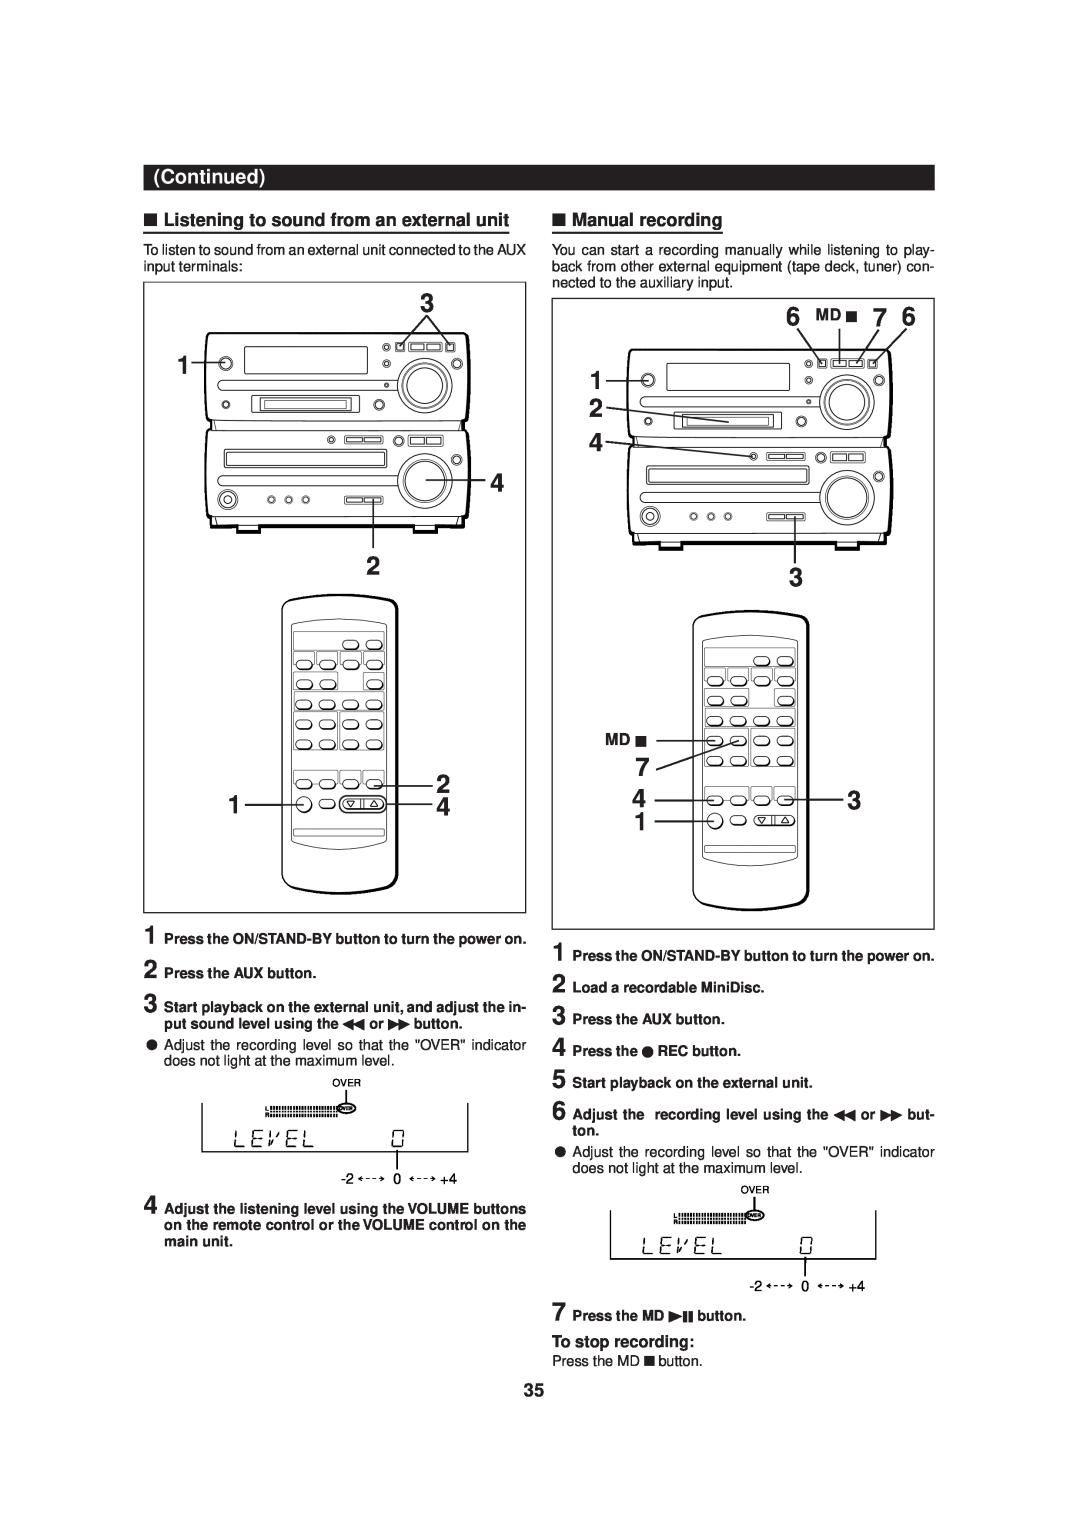 Sharp MD-MX20 operation manual Listening to sound from an external unit, Manual recording 